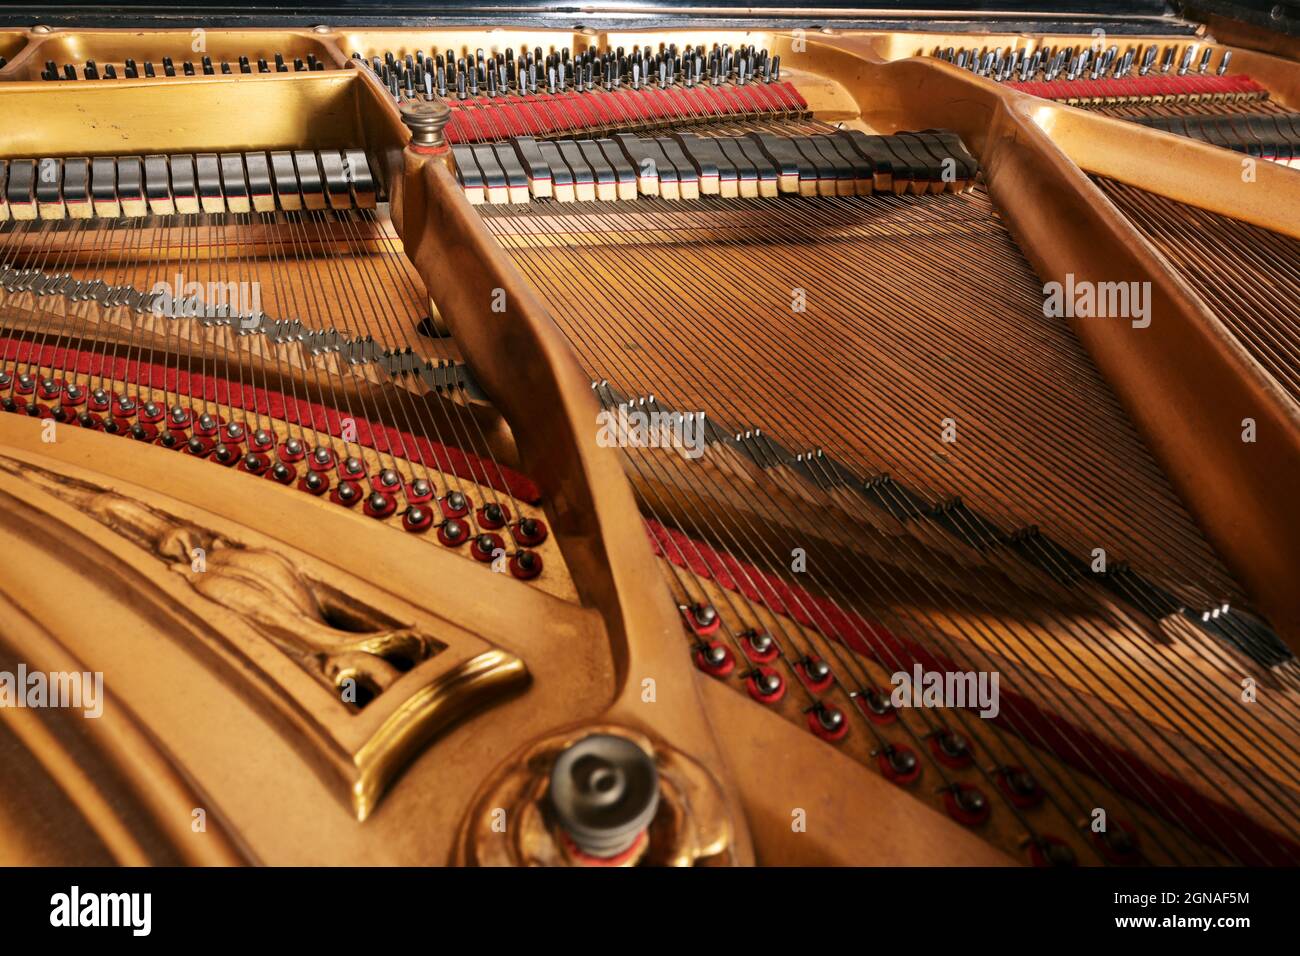 Inside an older grand piano with golden painted metal frame, strings, hammer, damper and red felt, showing the mechanics of the acoustic musical instr Stock Photo